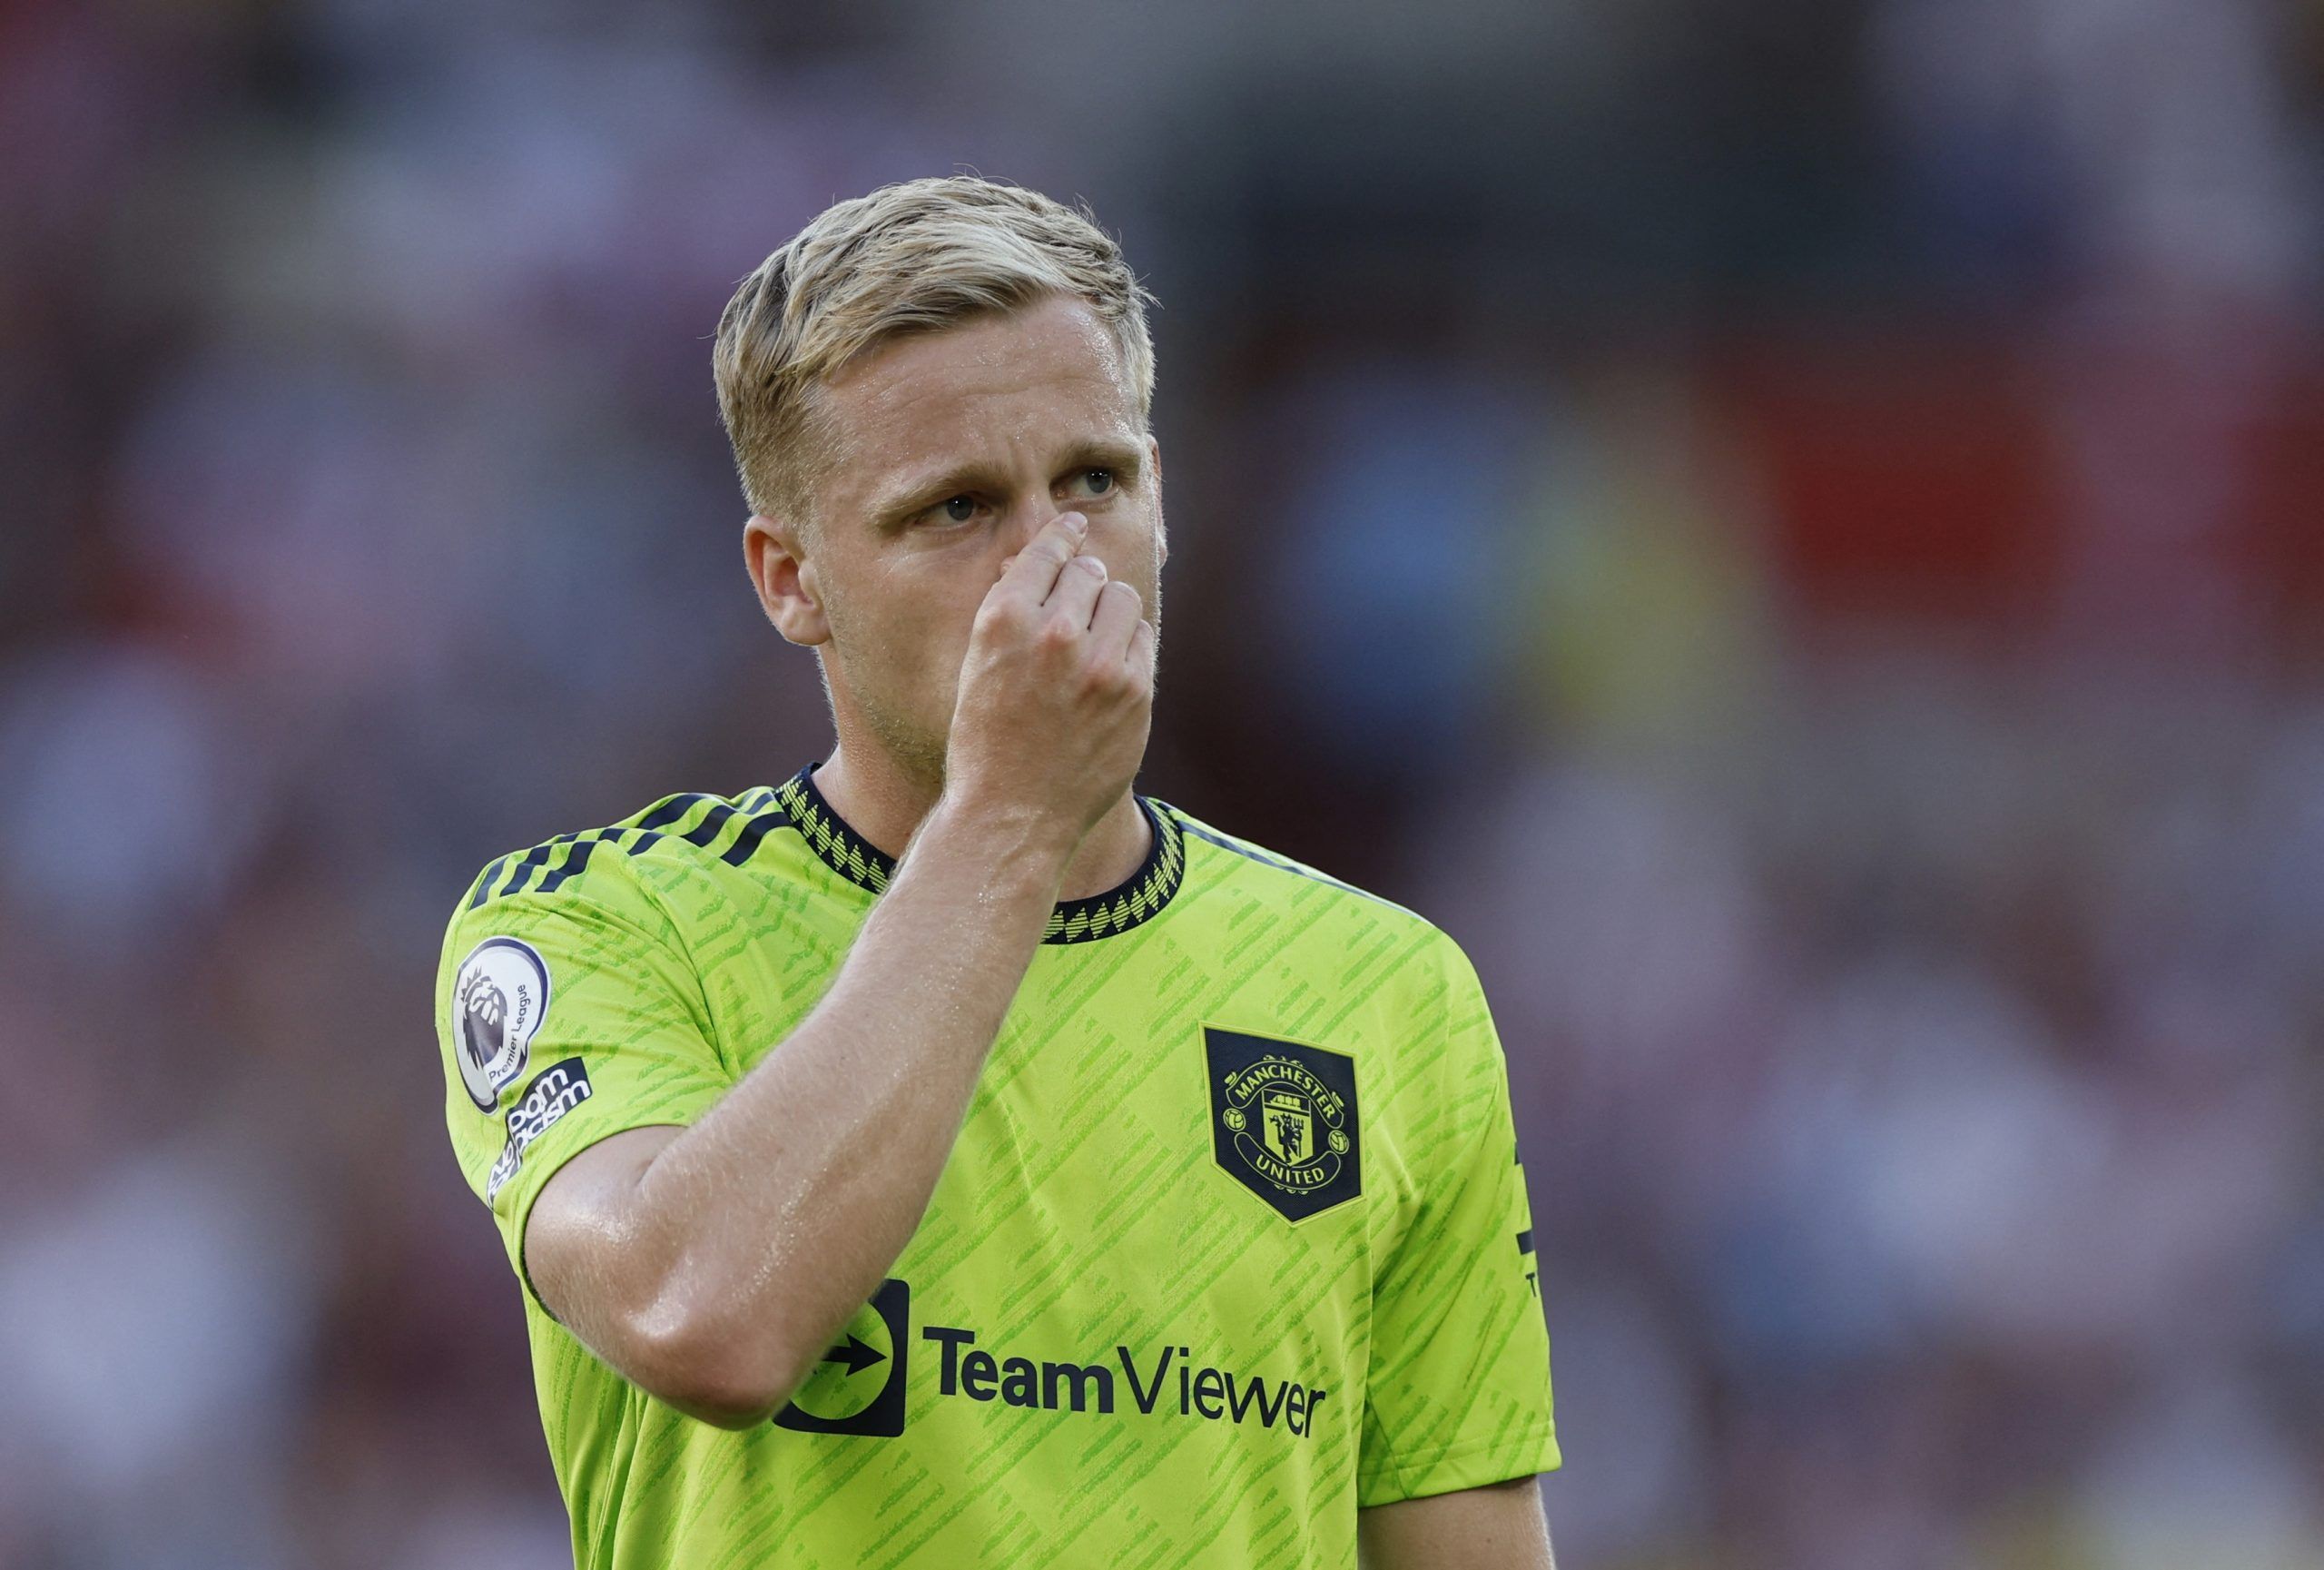 Soccer Football - Premier League - Brentford v Manchester United - Brentford Community Stadium, London, Britain - August 13, 2022 Manchester United's Donny van de Beek looks dejected after the match Action Images via Reuters/John Sibley EDITORIAL USE ONLY. No use with unauthorized audio, video, data, fixture lists, club/league logos or 'live' services. Online in-match use limited to 75 images, no video emulation. No use in betting, games or single club /league/player publications.  Please contac